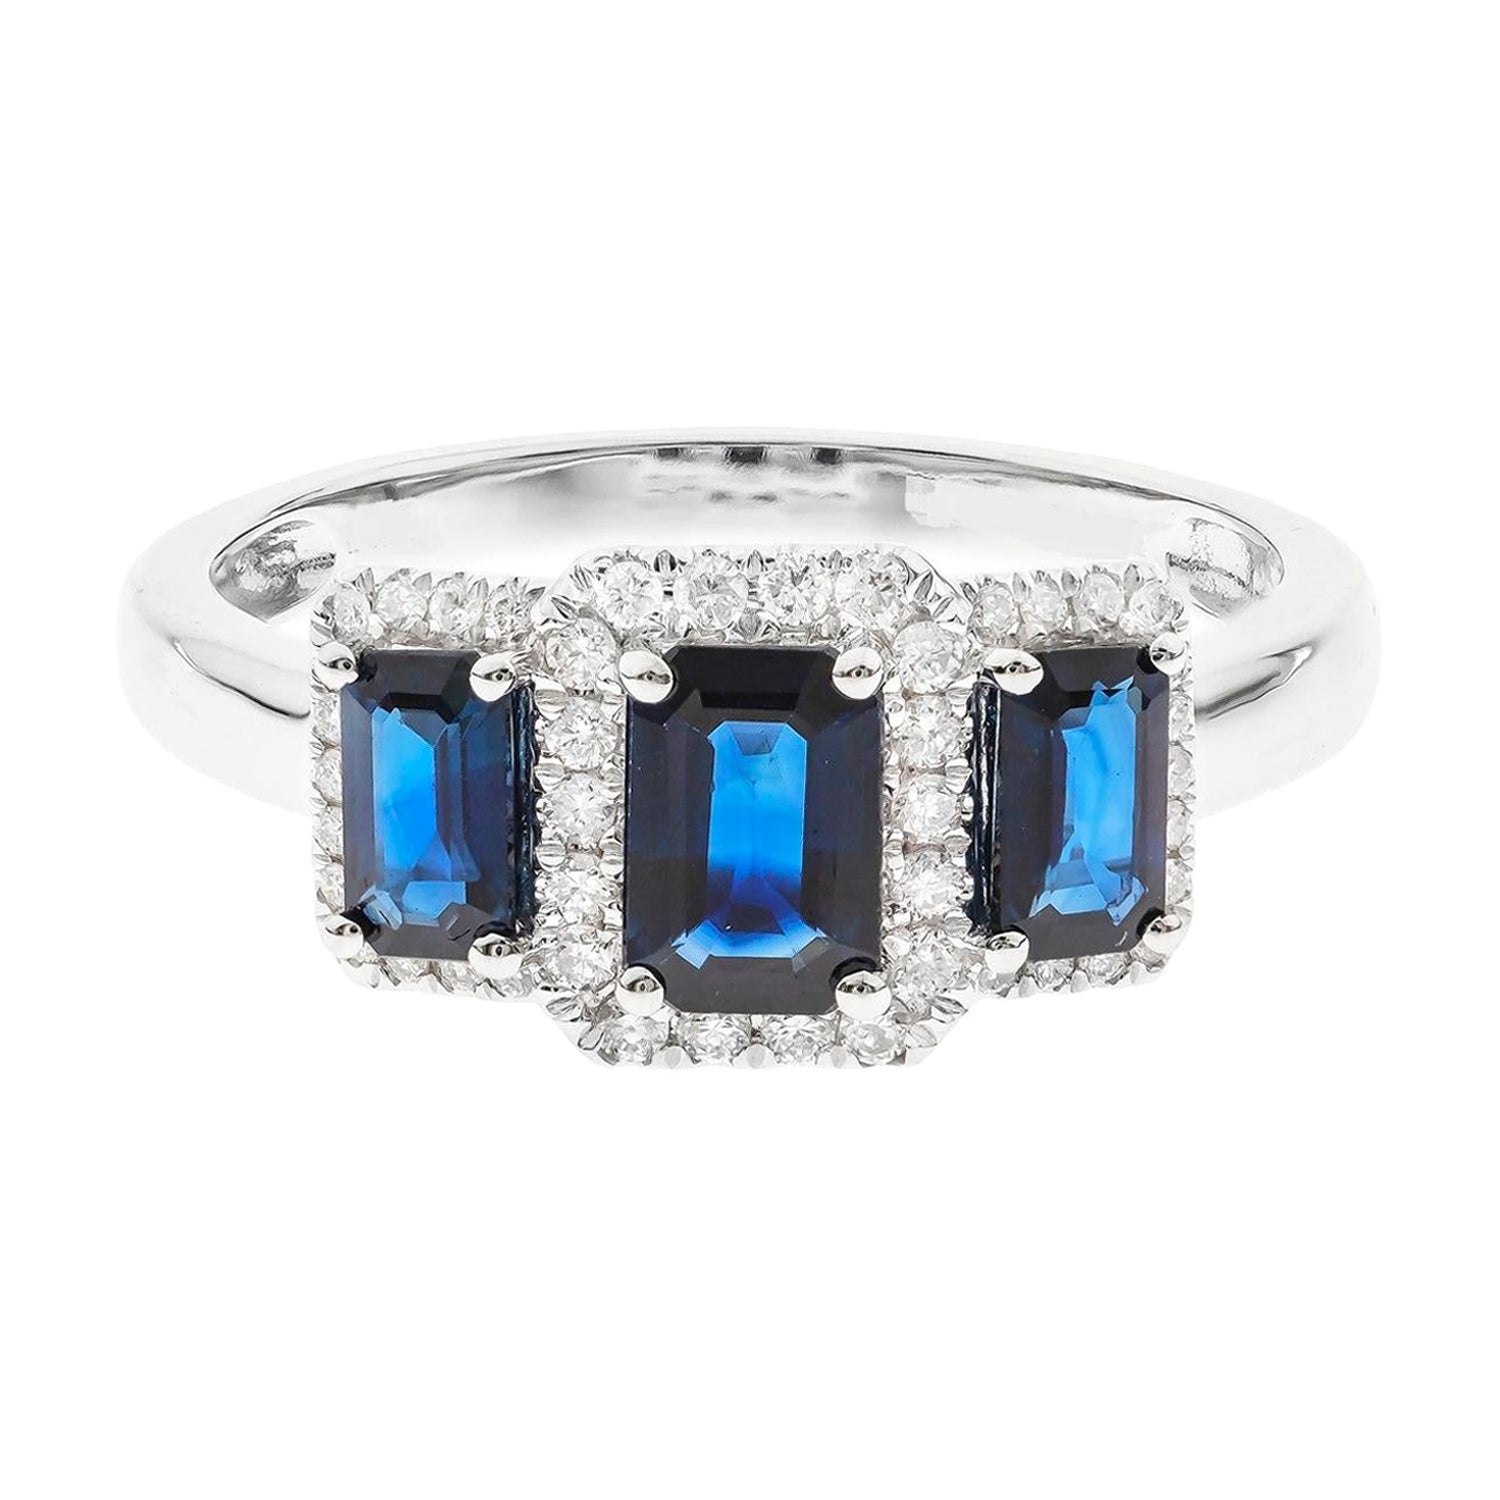 1.31 Carat Emerald-Cut Blue Sapphire with Diamond Accents 14K White Gold Ring